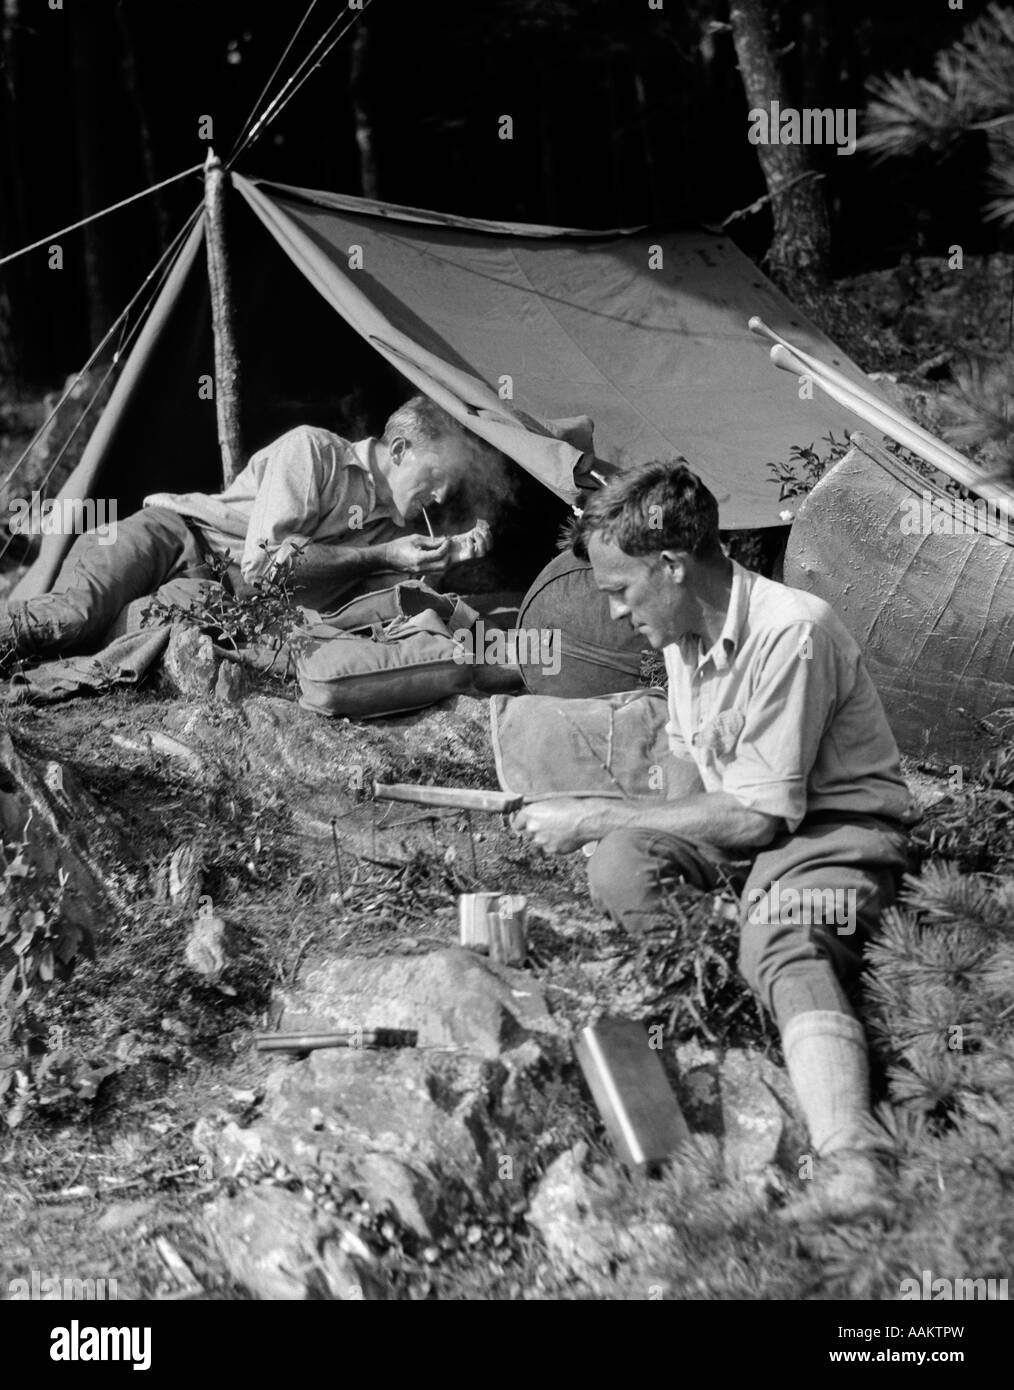 1920s TWO MEN AT PRIMITIVE CAMPSITE ONE MAN IN A FRAME TENT LIGHTING CIGARETTE Stock Photo